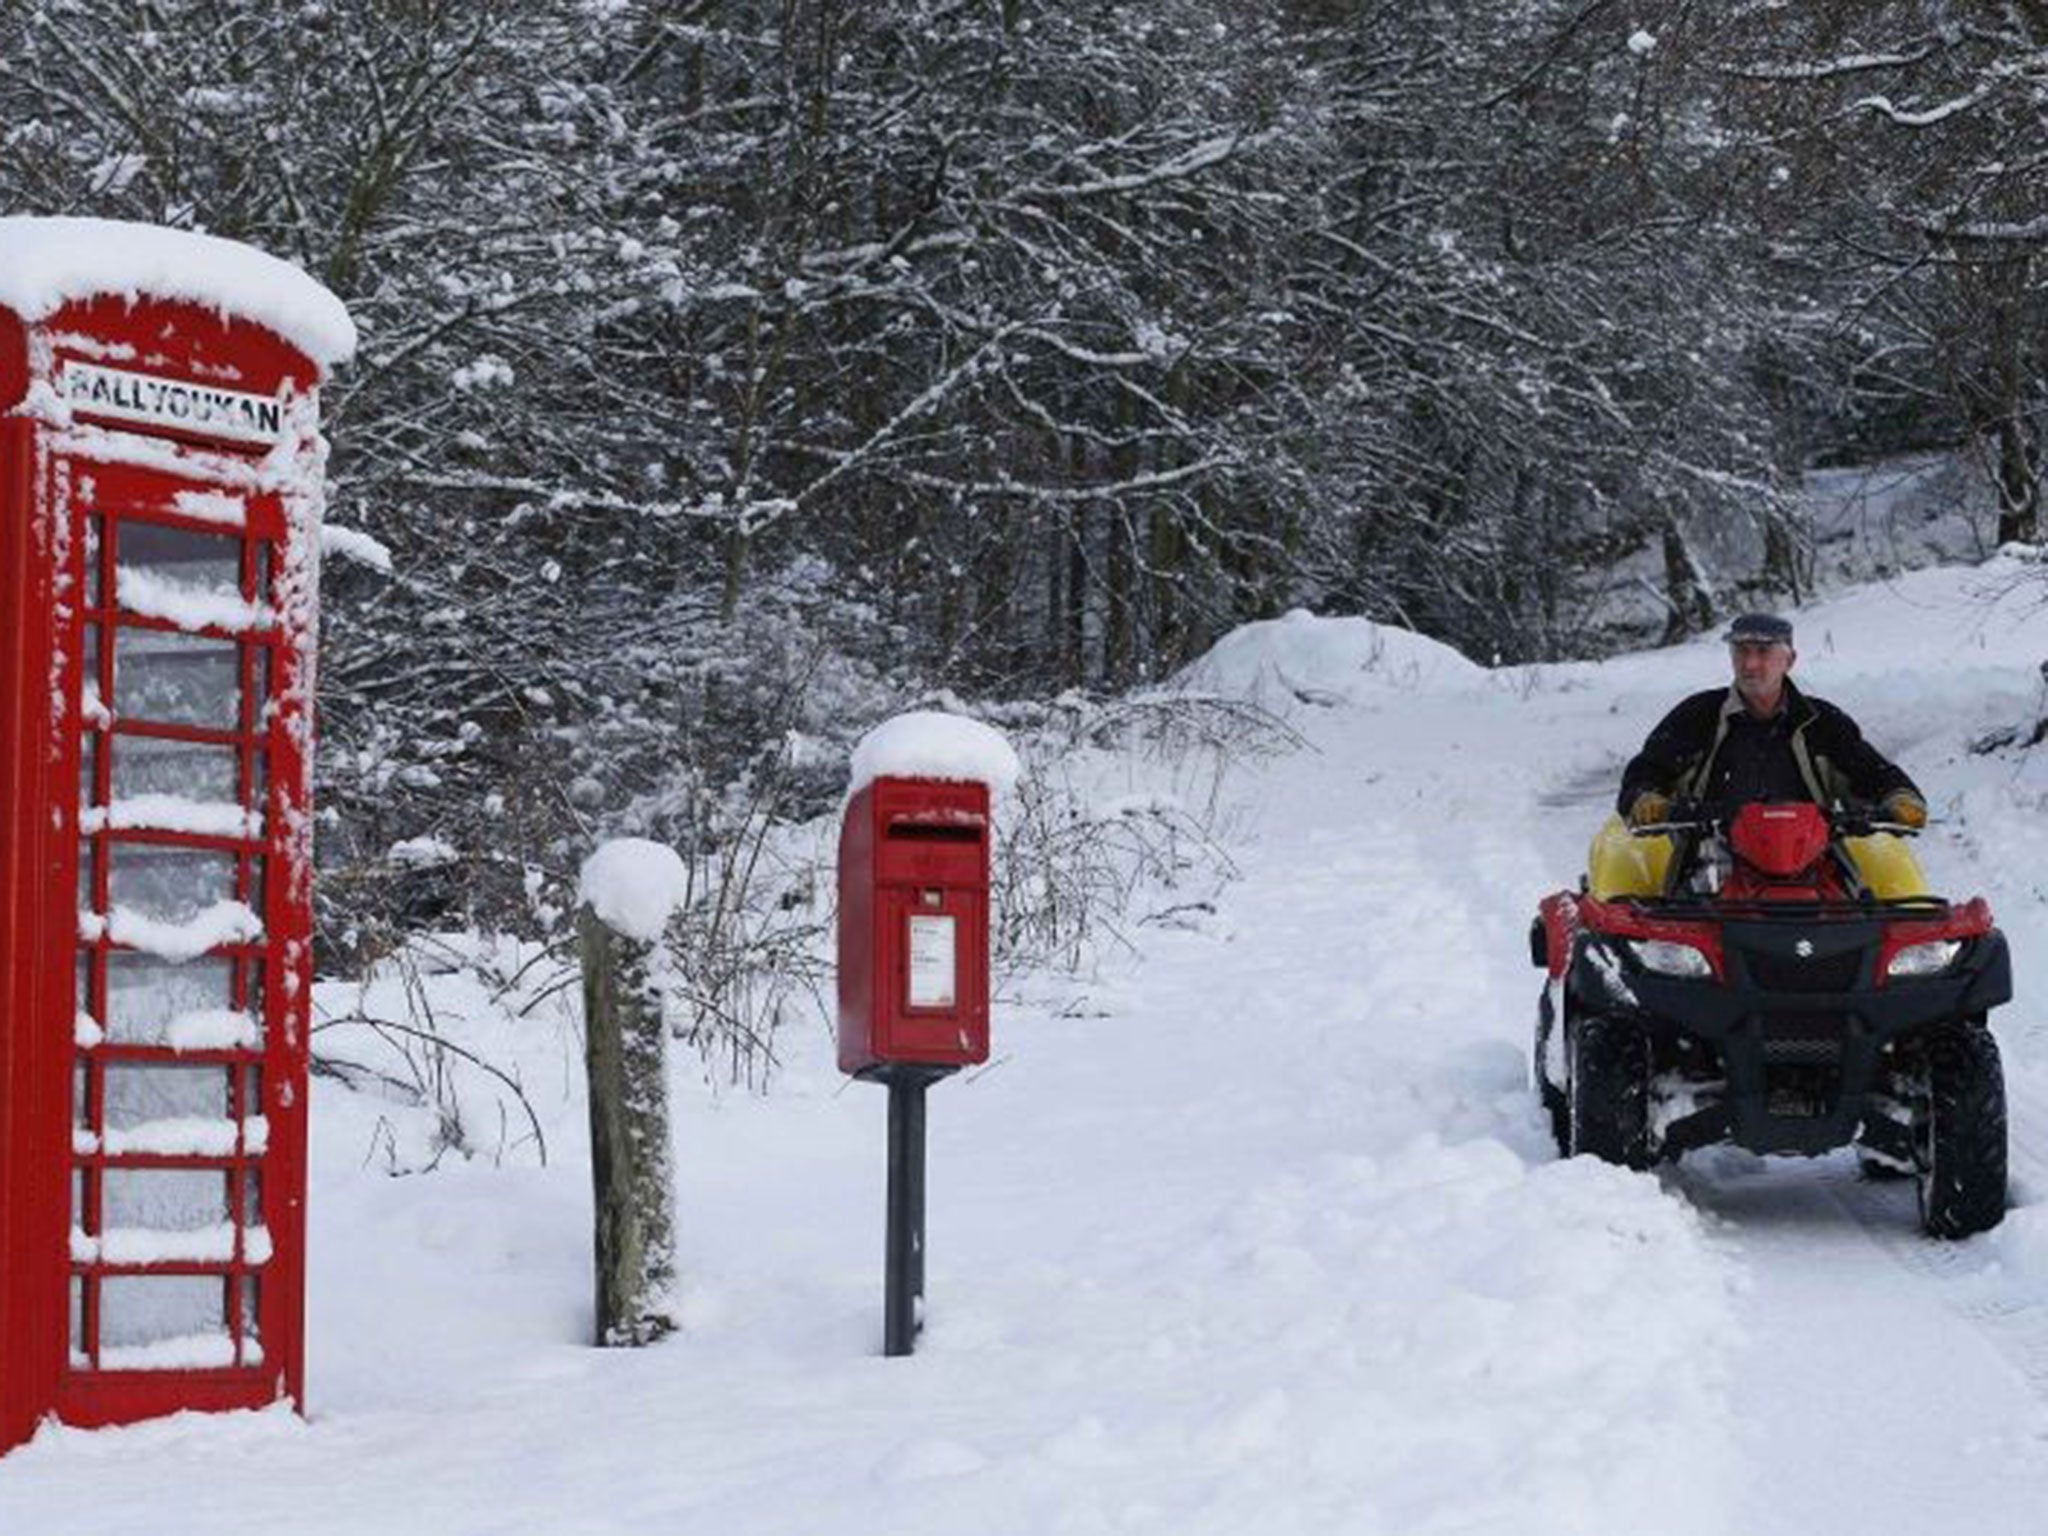 A farmer rides his quad bike on a snow-covered road in East Haugh, central Scotland, on 14 January